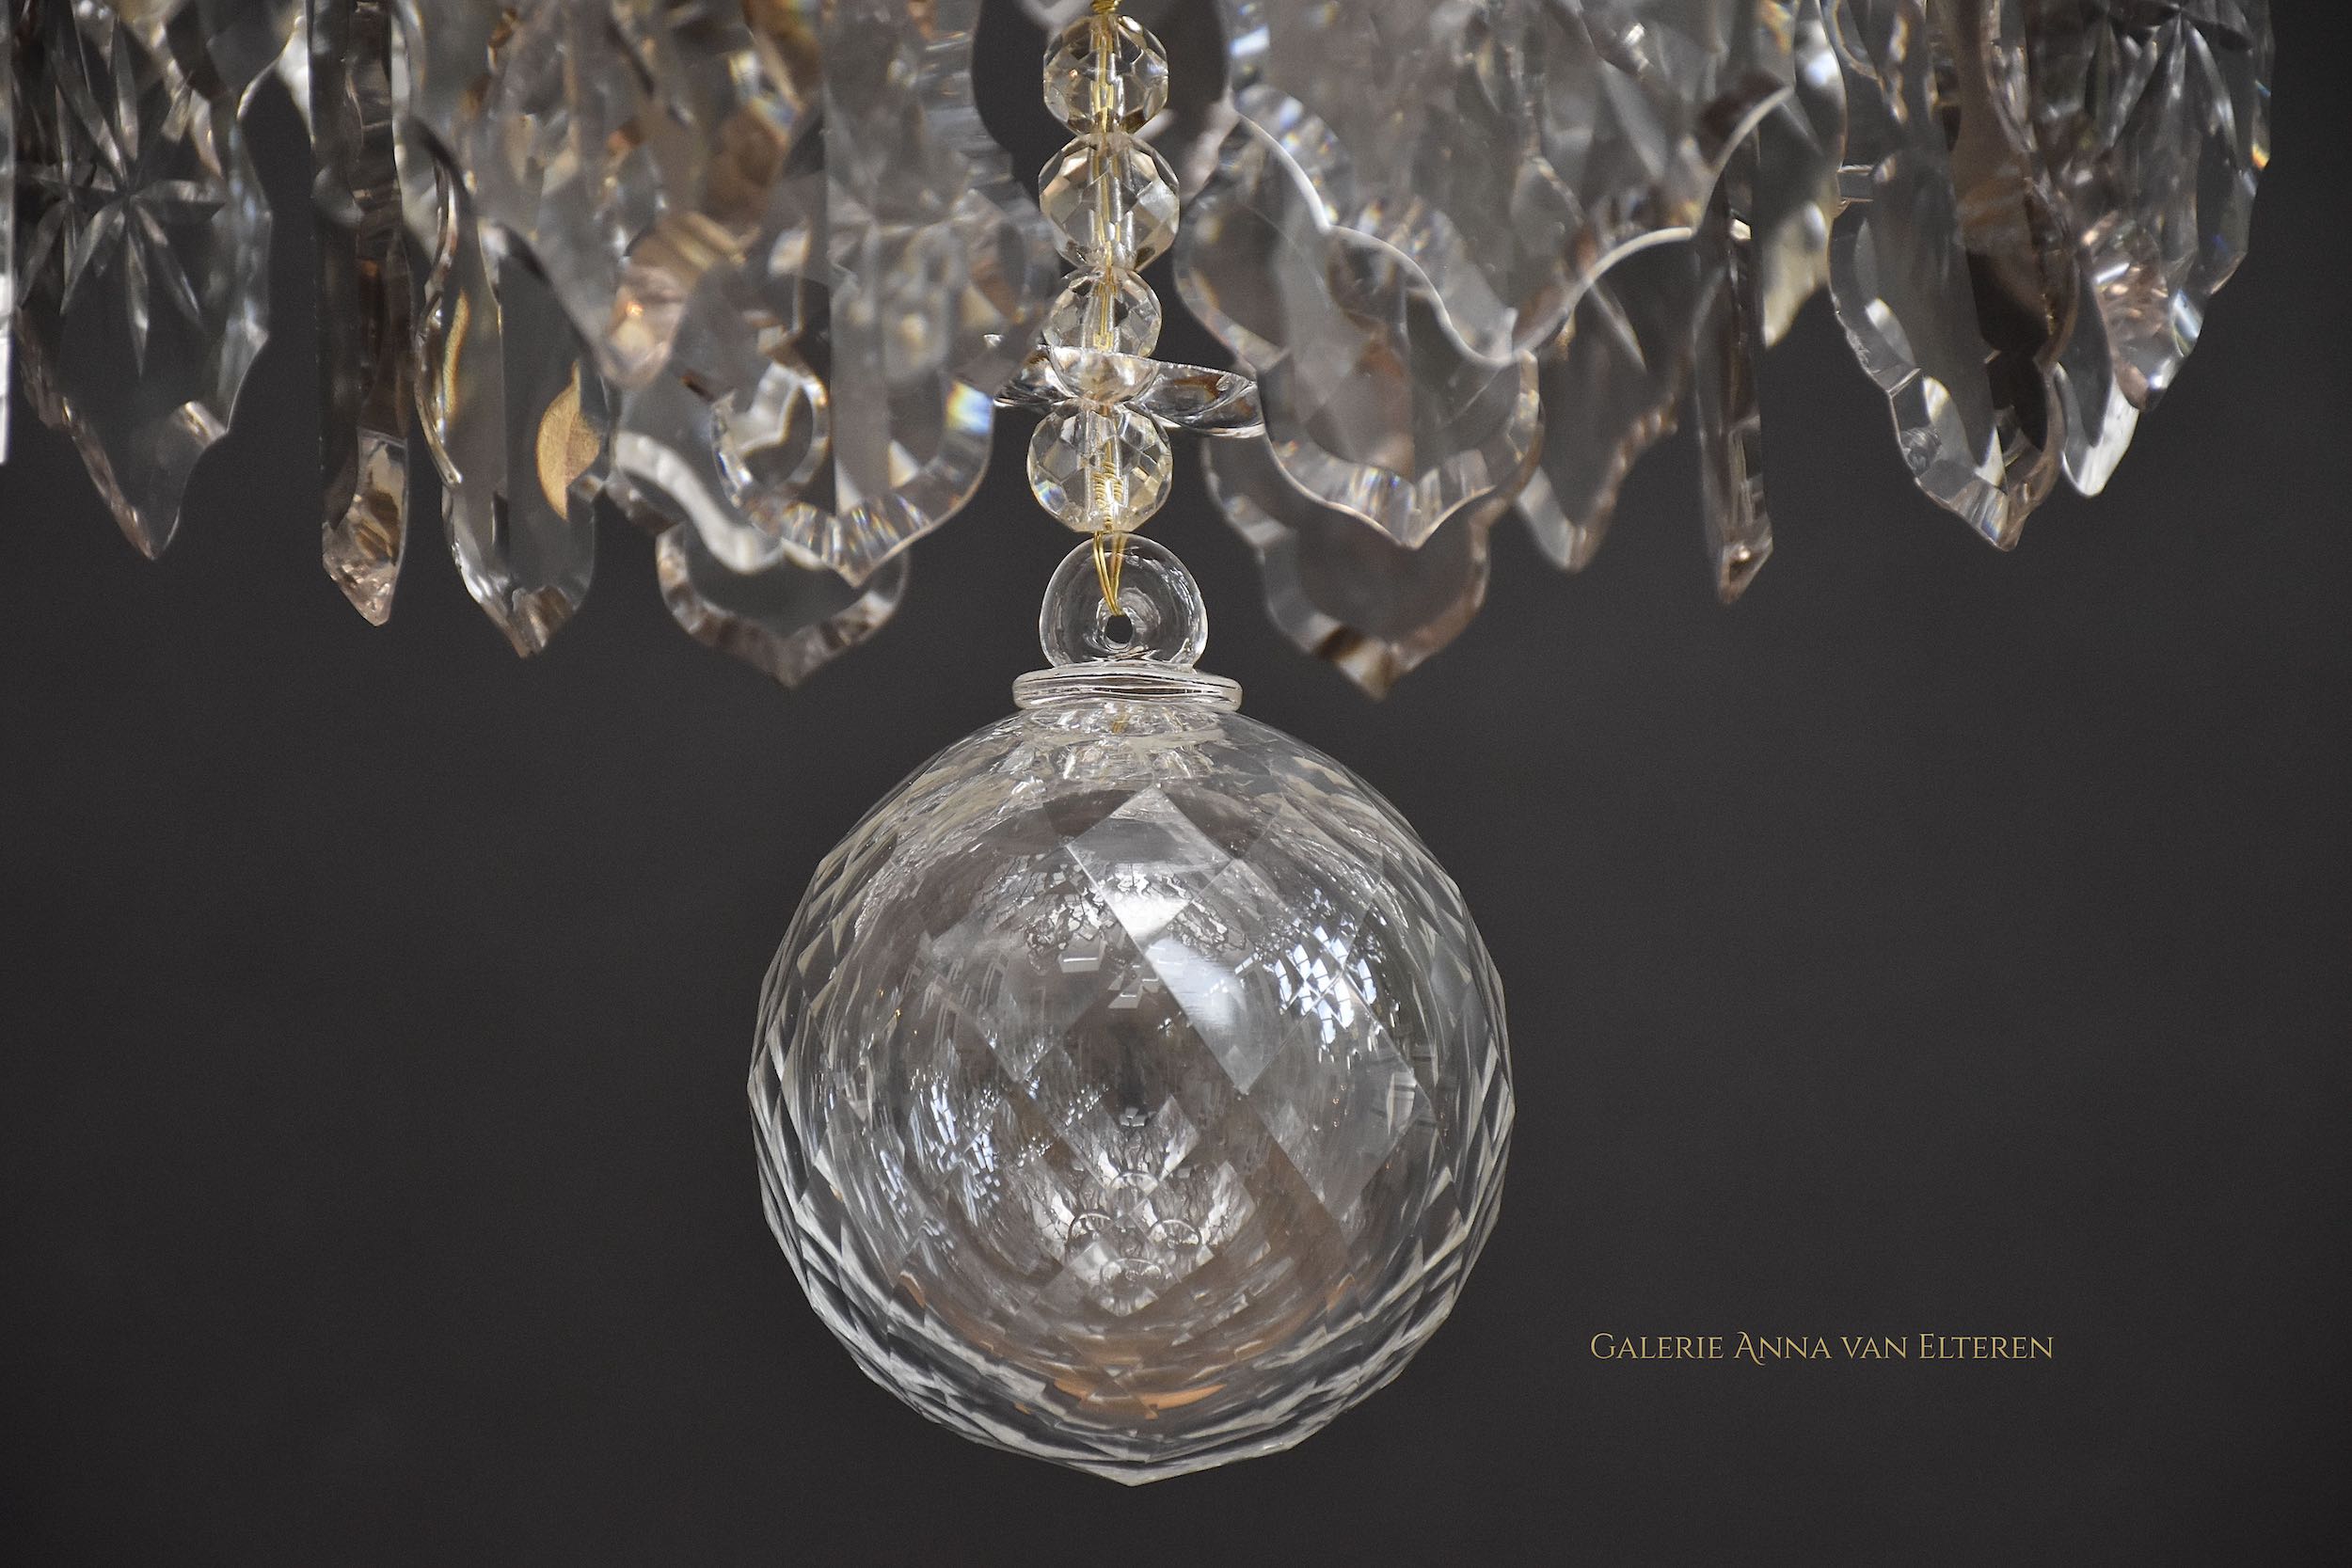 Antique chandelier in the style of Rococo